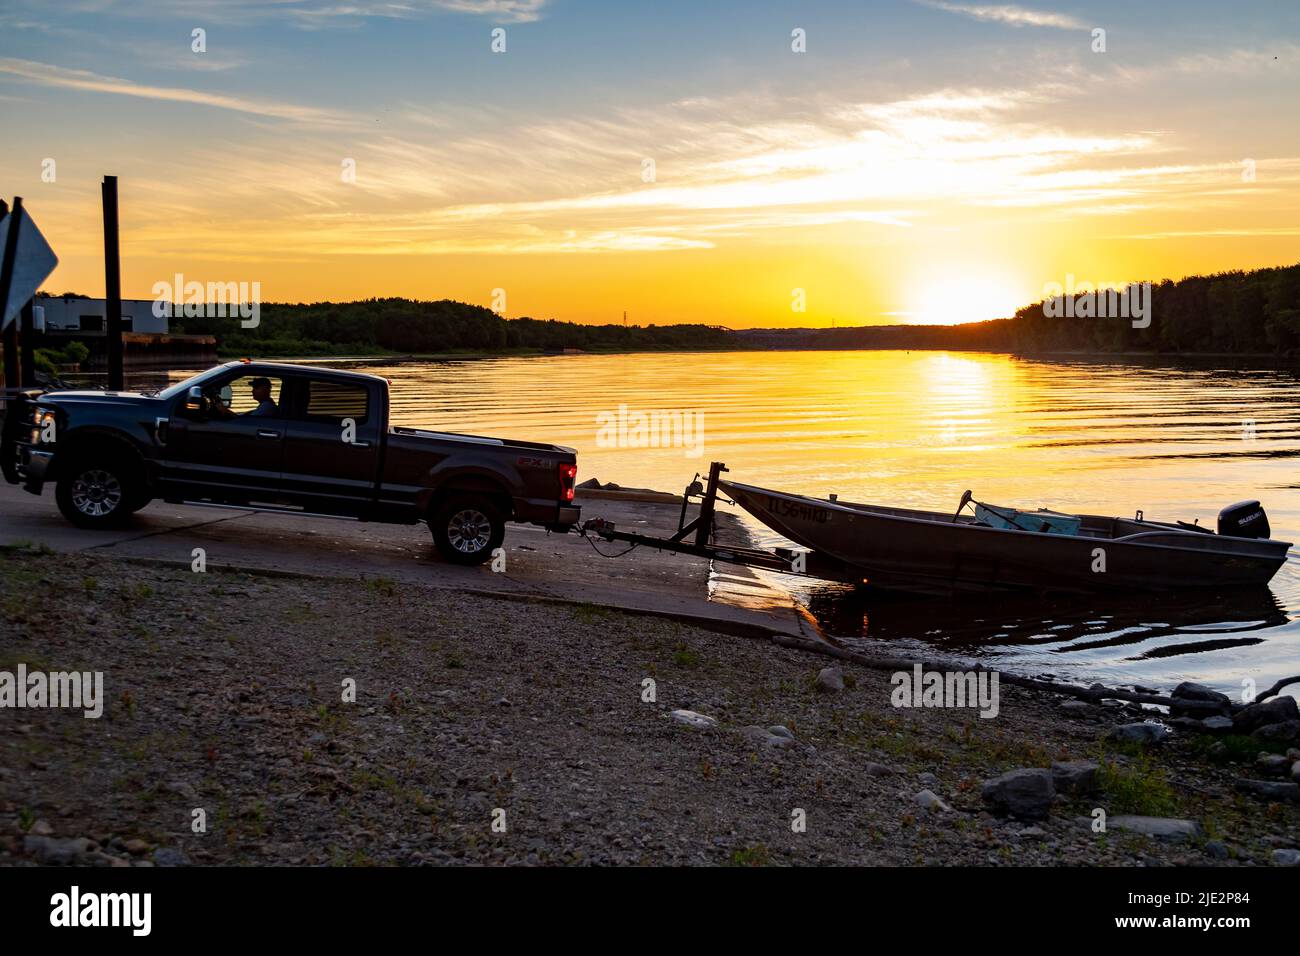 Peoria, Illinois - As the sun rises over the Illinois River, Dave Buchanan backs his fishing boat into the water to check his lines for catfish. He us Stock Photo